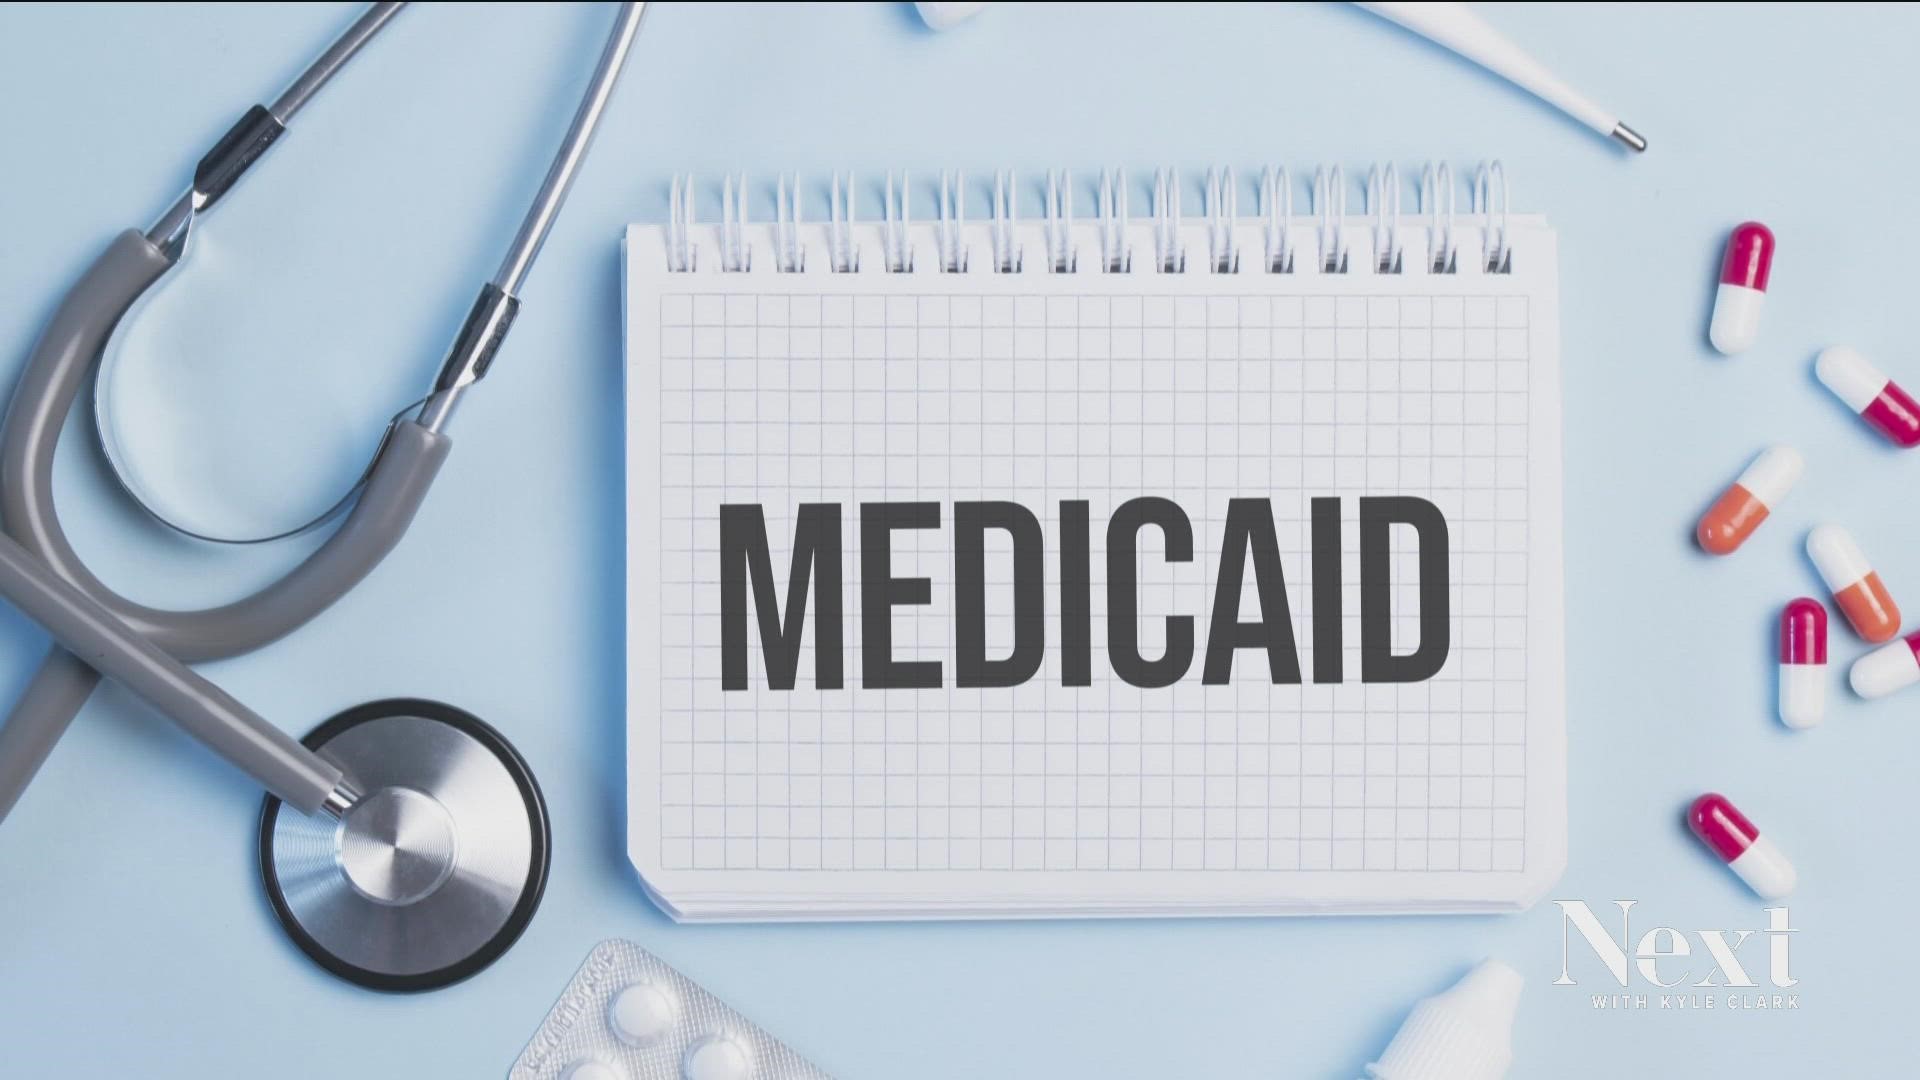 "It is actually illegal for that provider to take private pay or out-of-pocket payment from a Medicaid member," a licensed professional counselor in Arvada said.